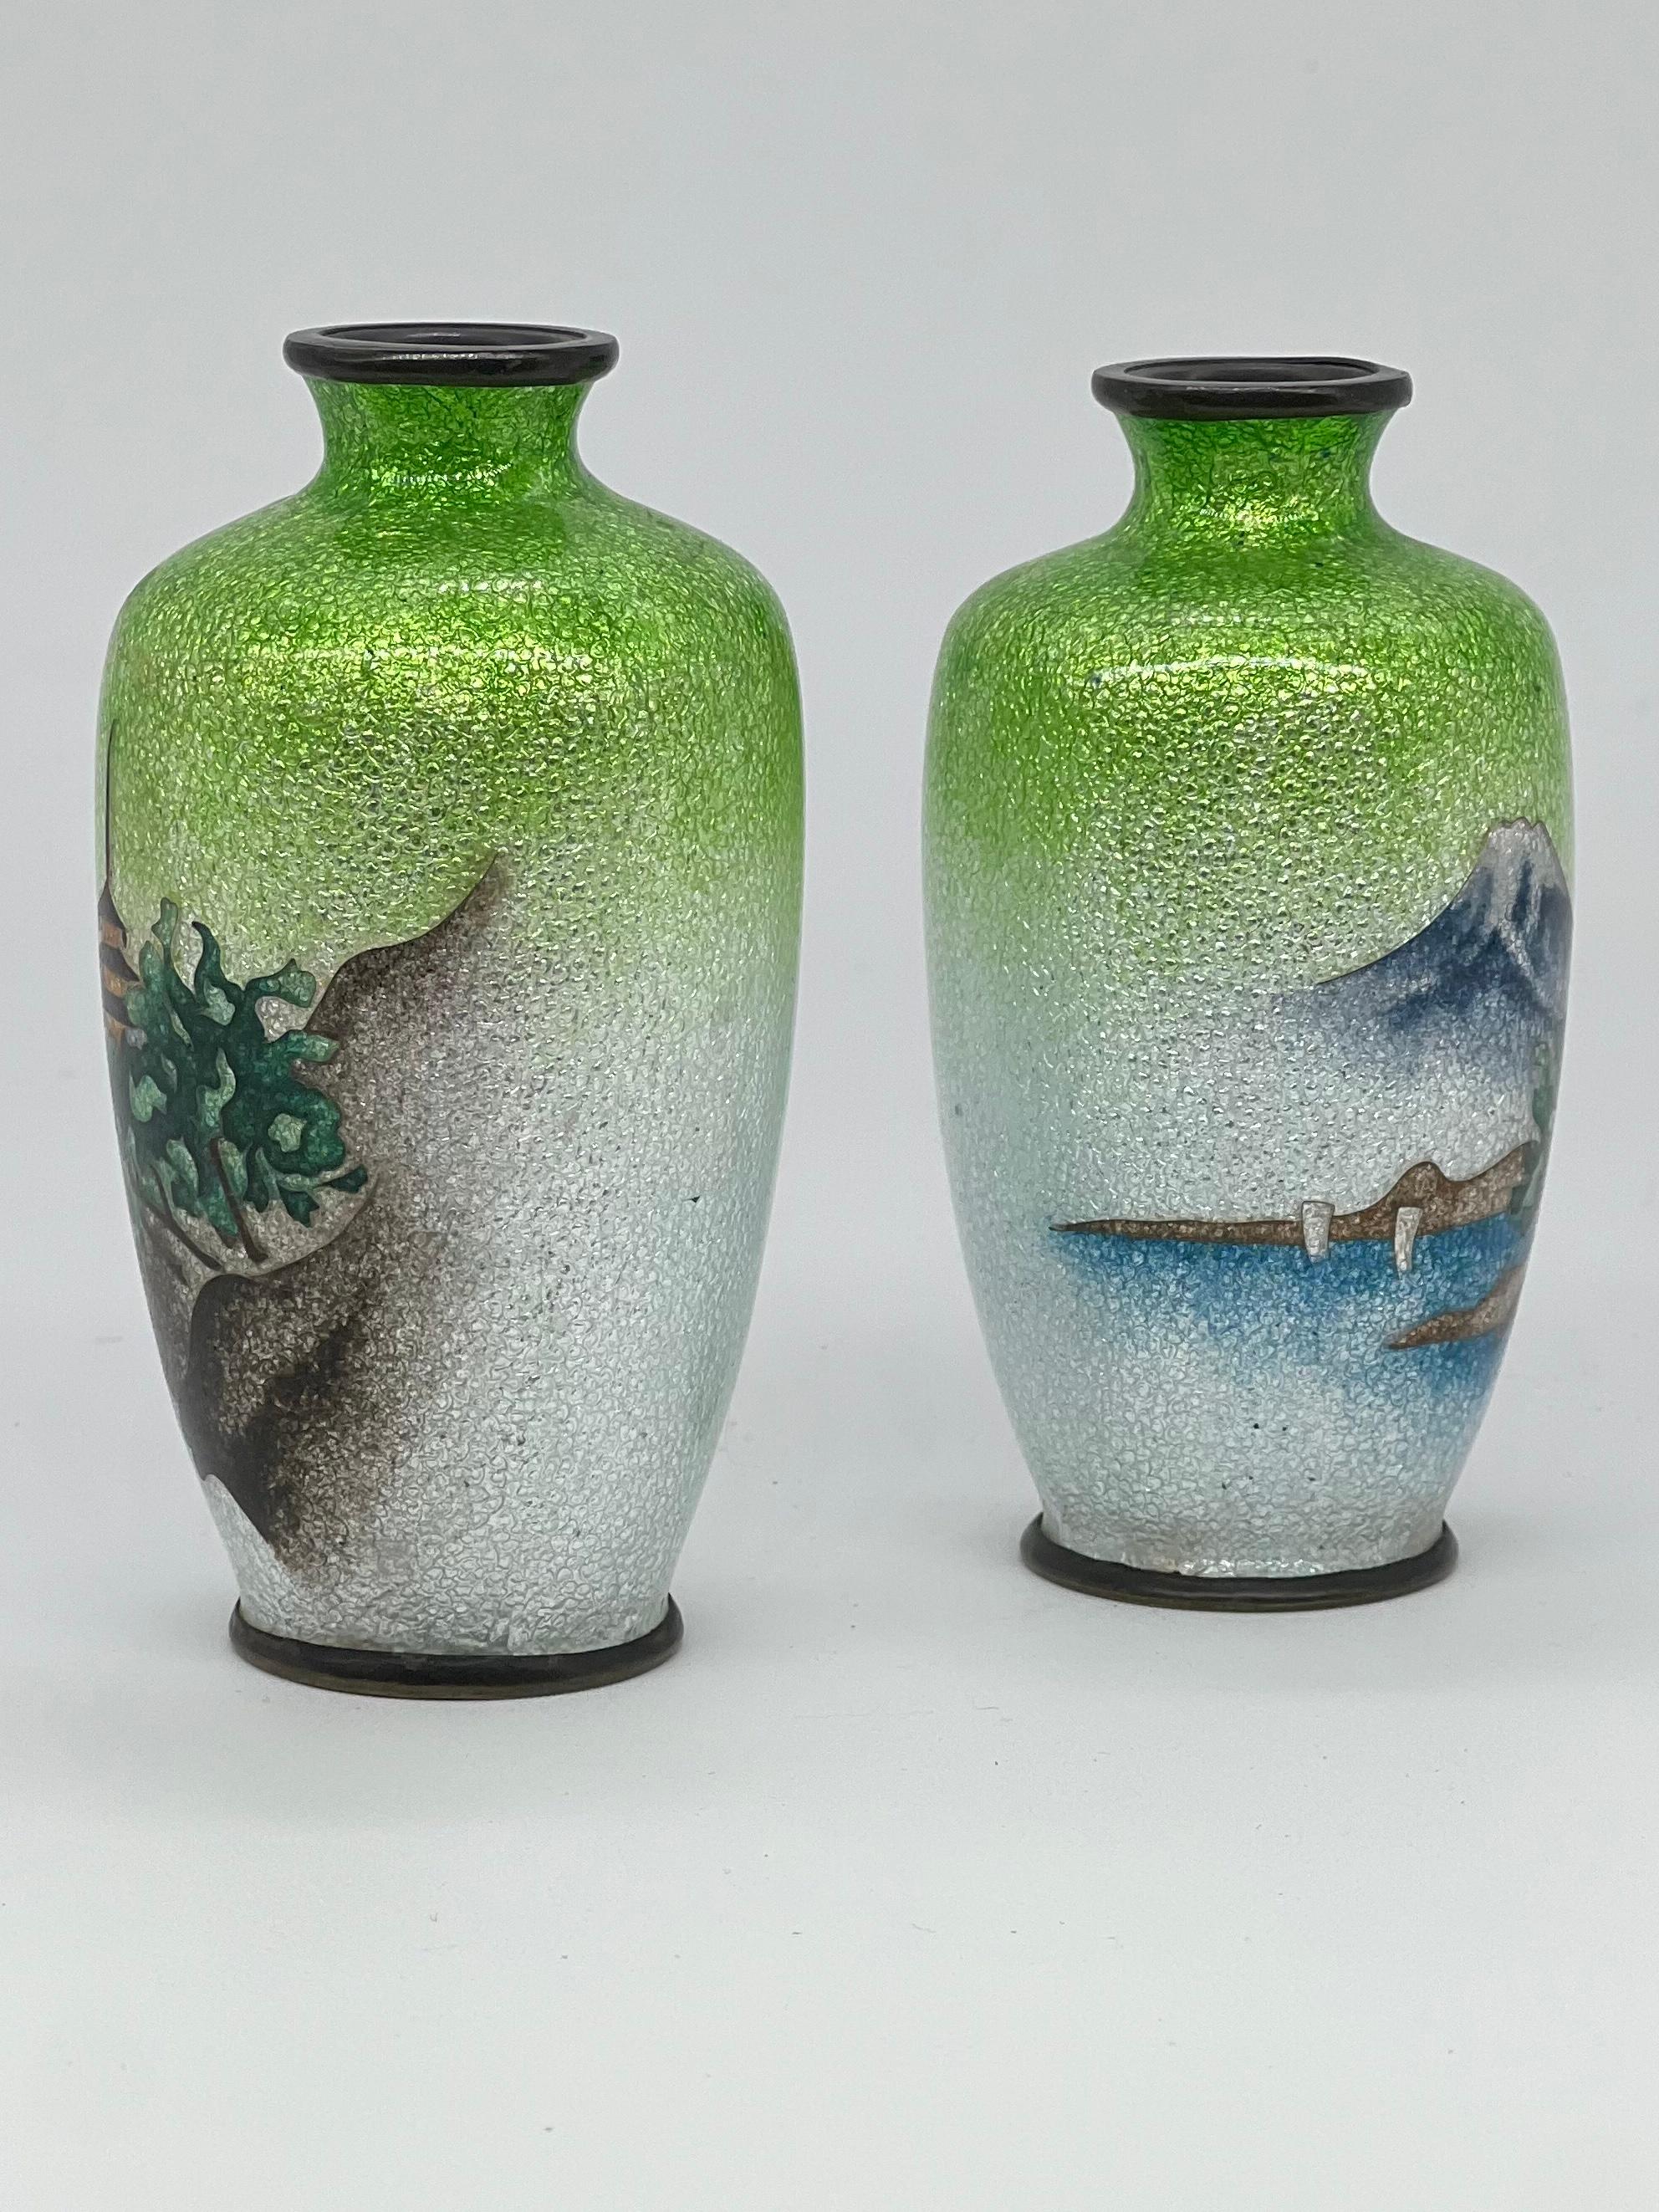 Lovely Pair of Antique Meiji Period Japanese Ginbari Cloisonne Vases, 19th C For Sale 4